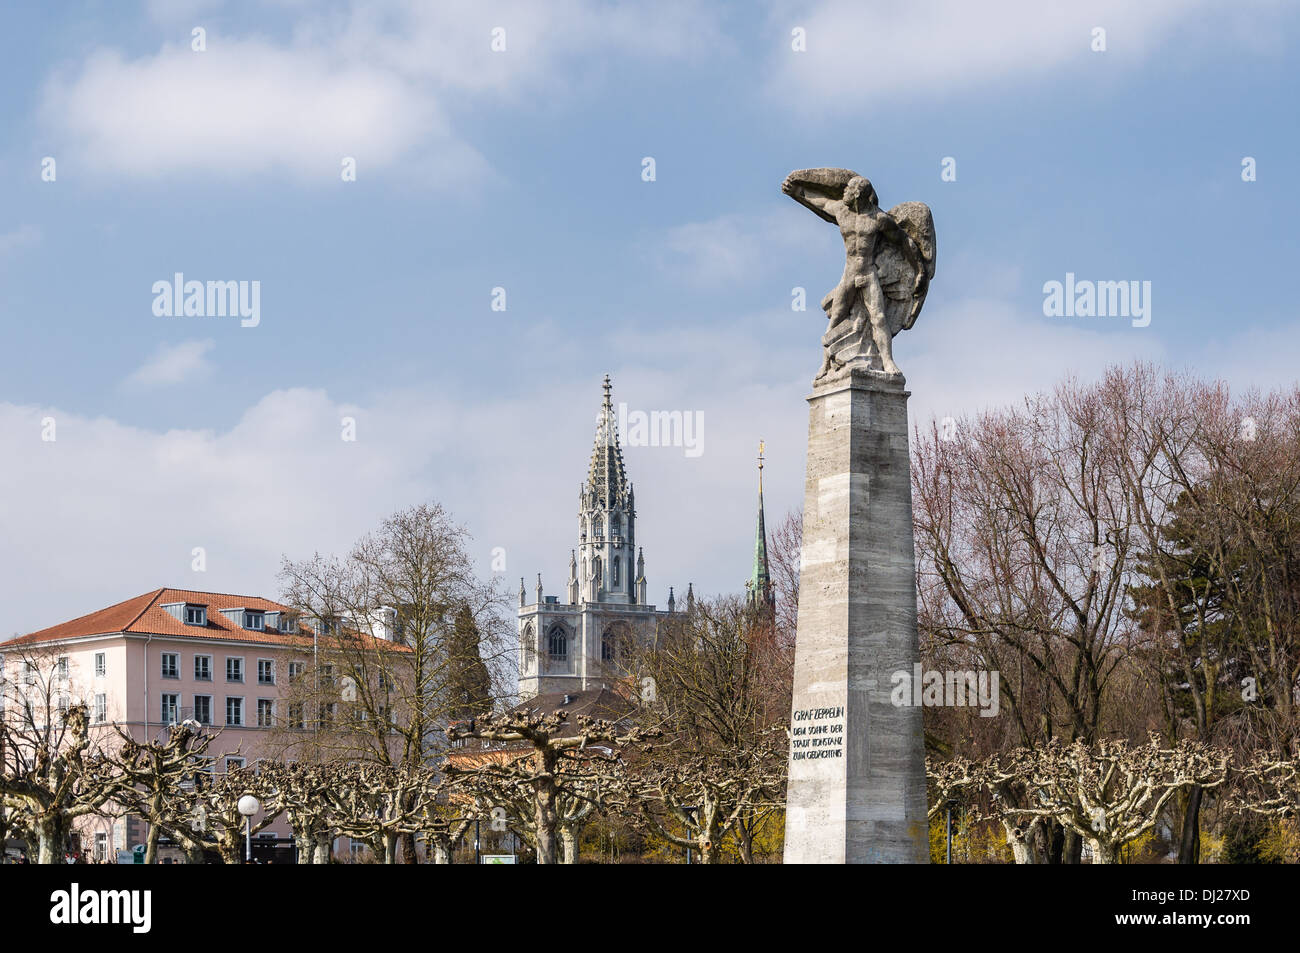 Konstanz, Germany: Monument in a town square. Stock Photo